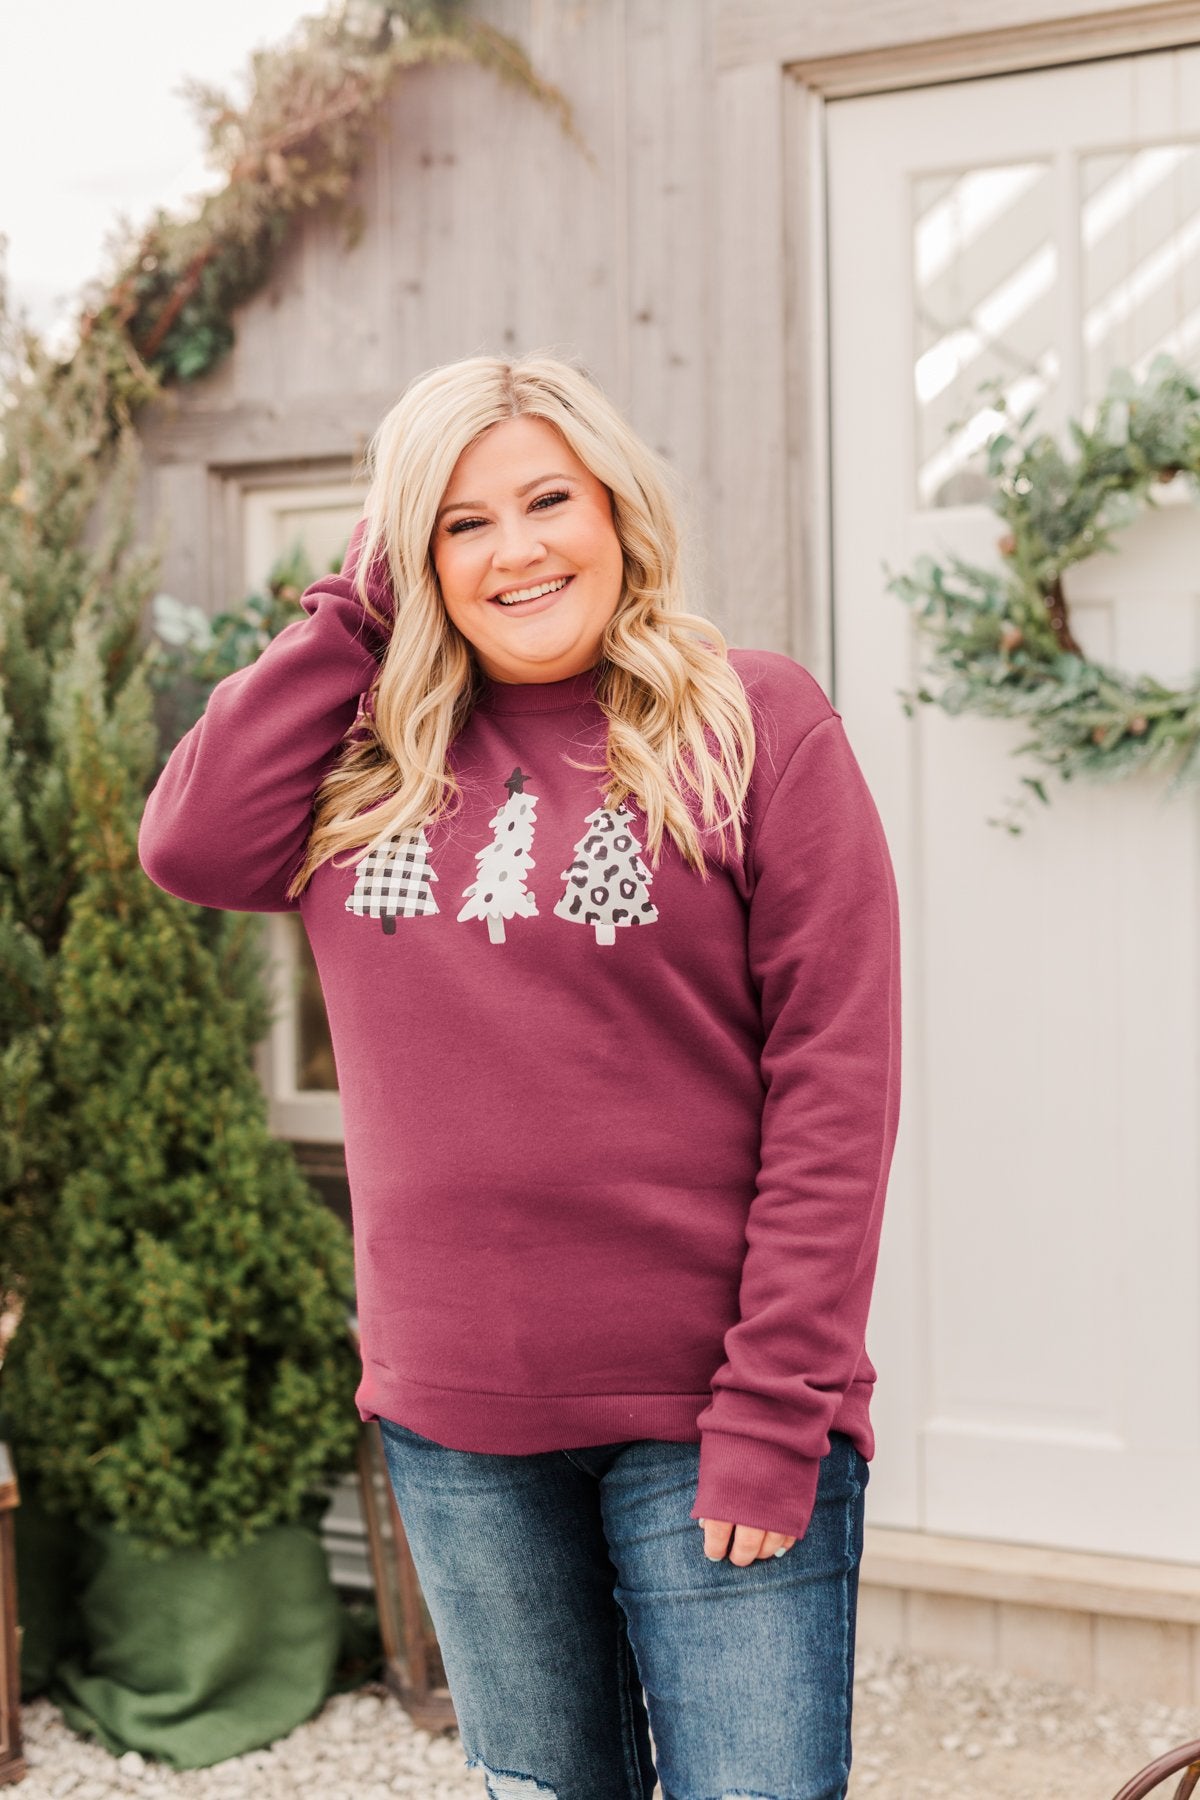 Three Christmas Trees Pullover Top- Burgundy